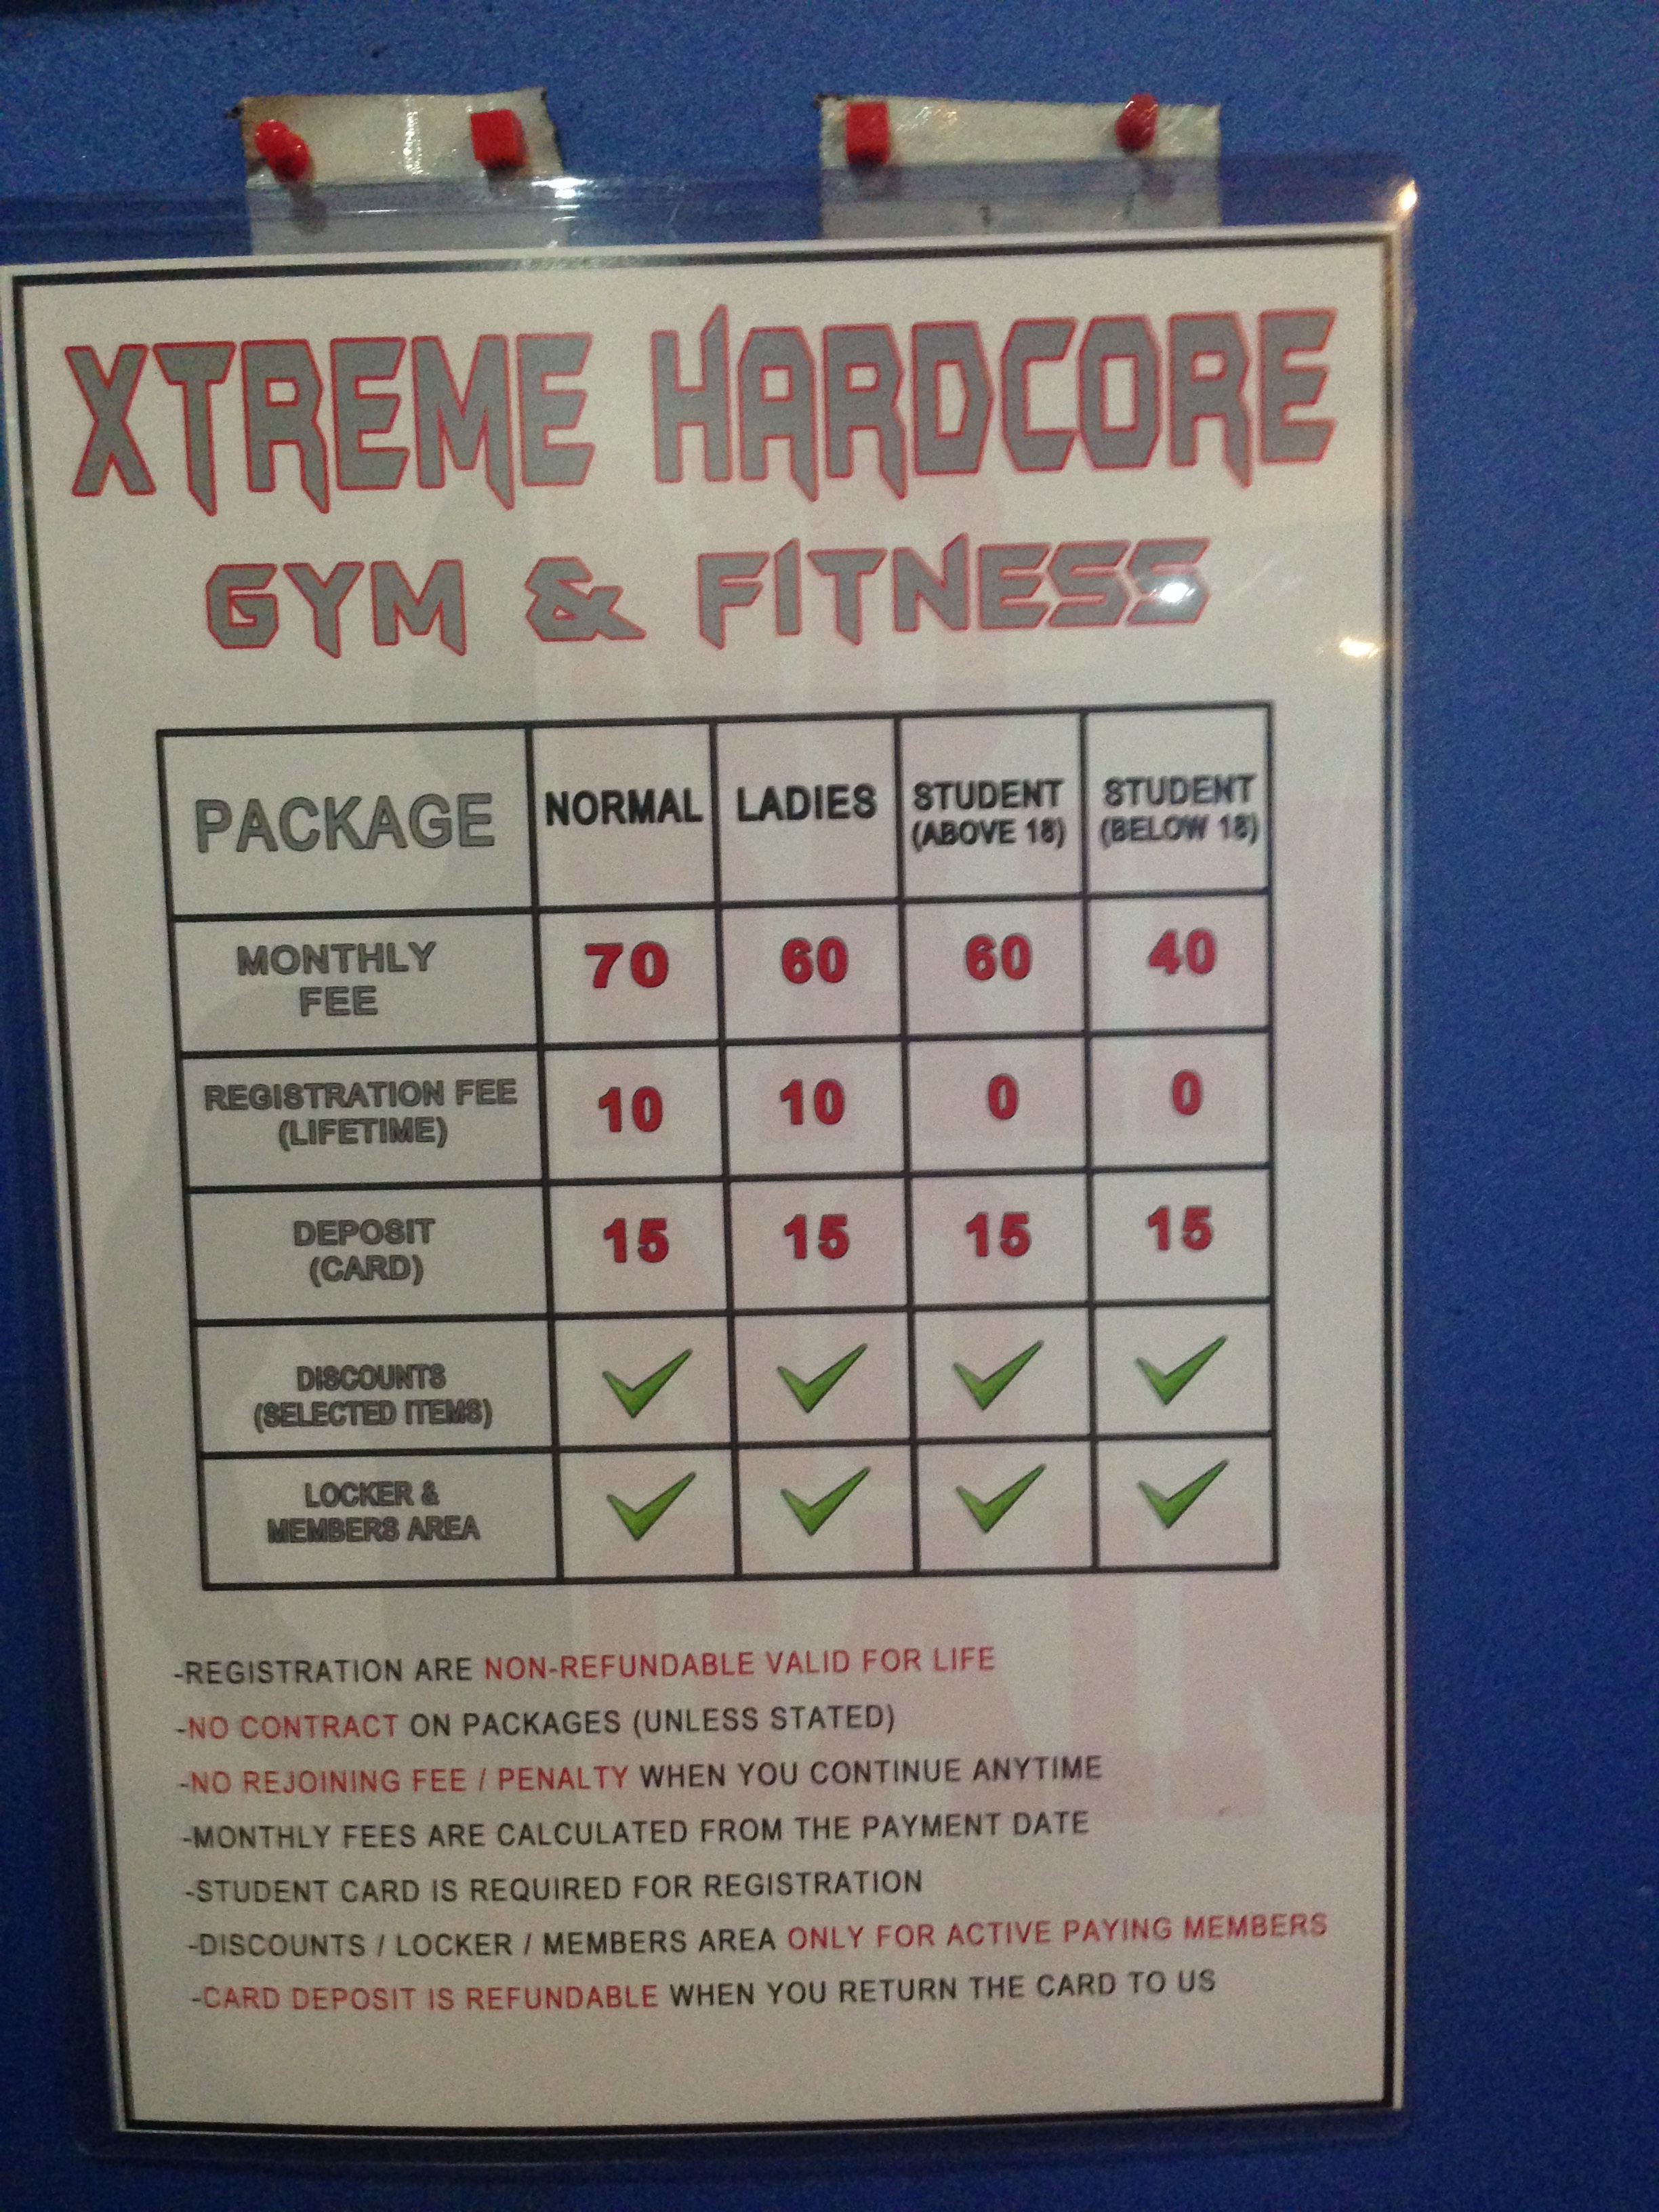 Xtreme Hardcore Gym Fitness Mygymreviews